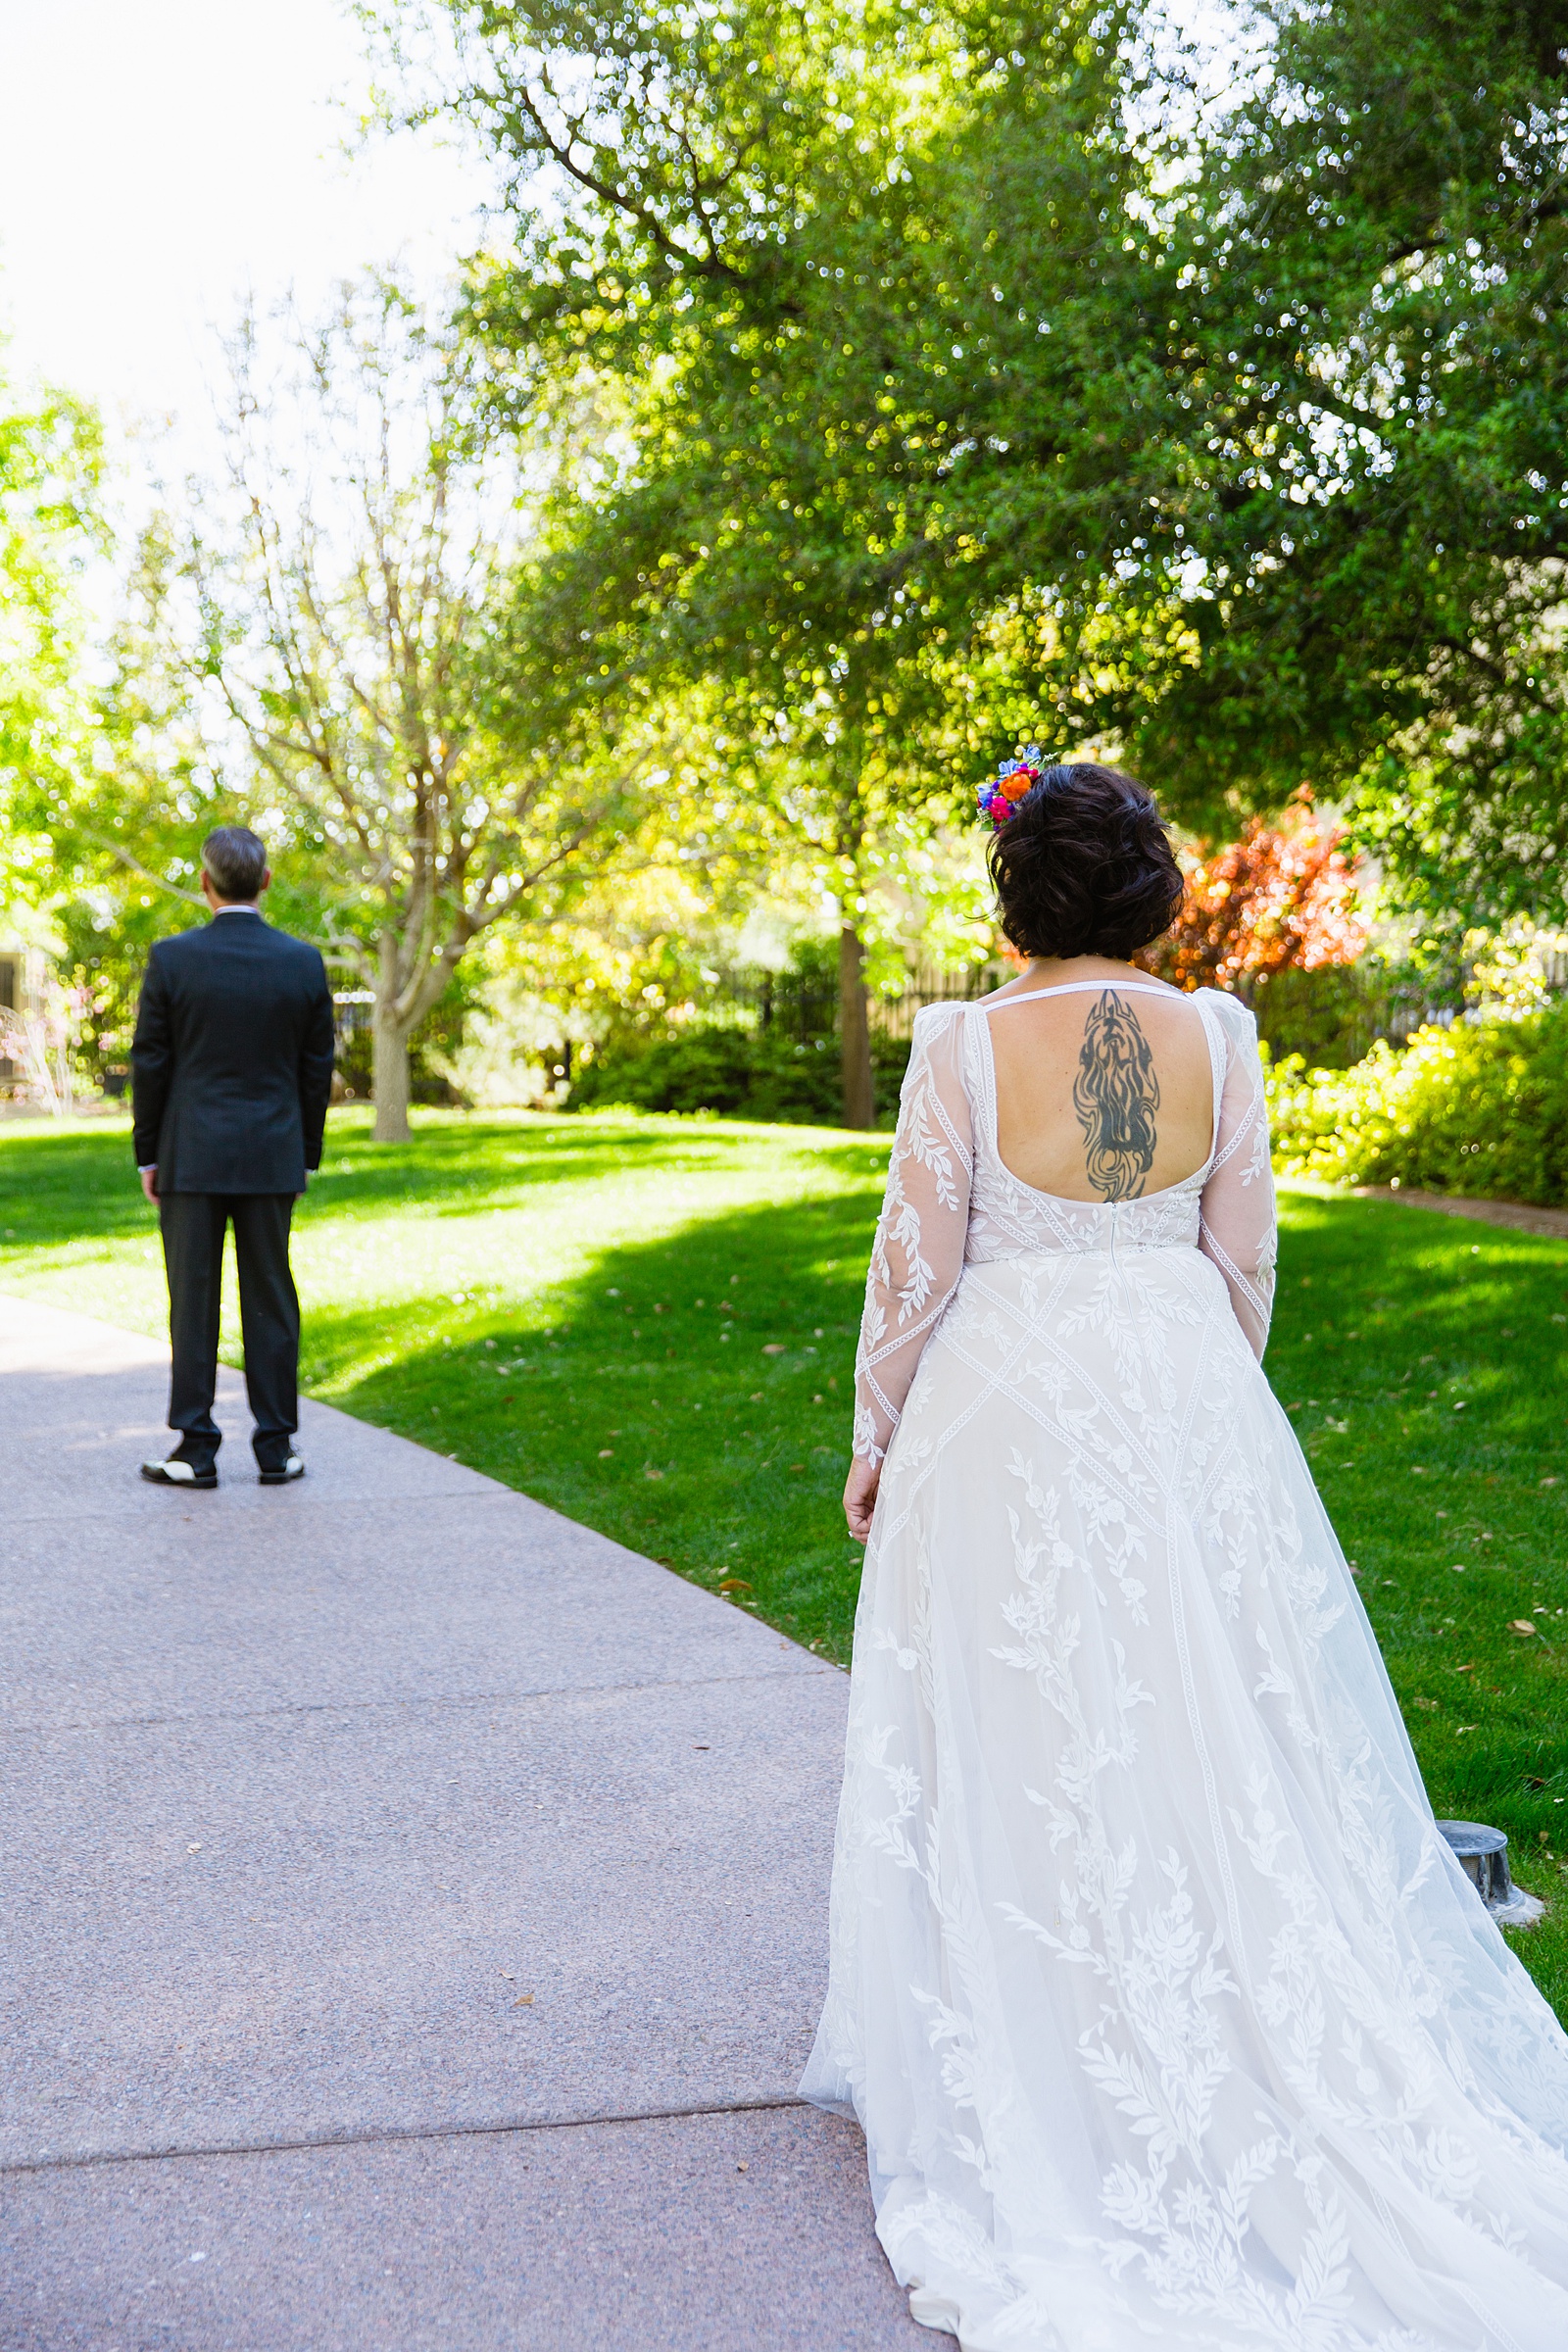 Bride and groom's first look at Japanese Friendship Garden by Phoenix wedding photographer PMA Photography.